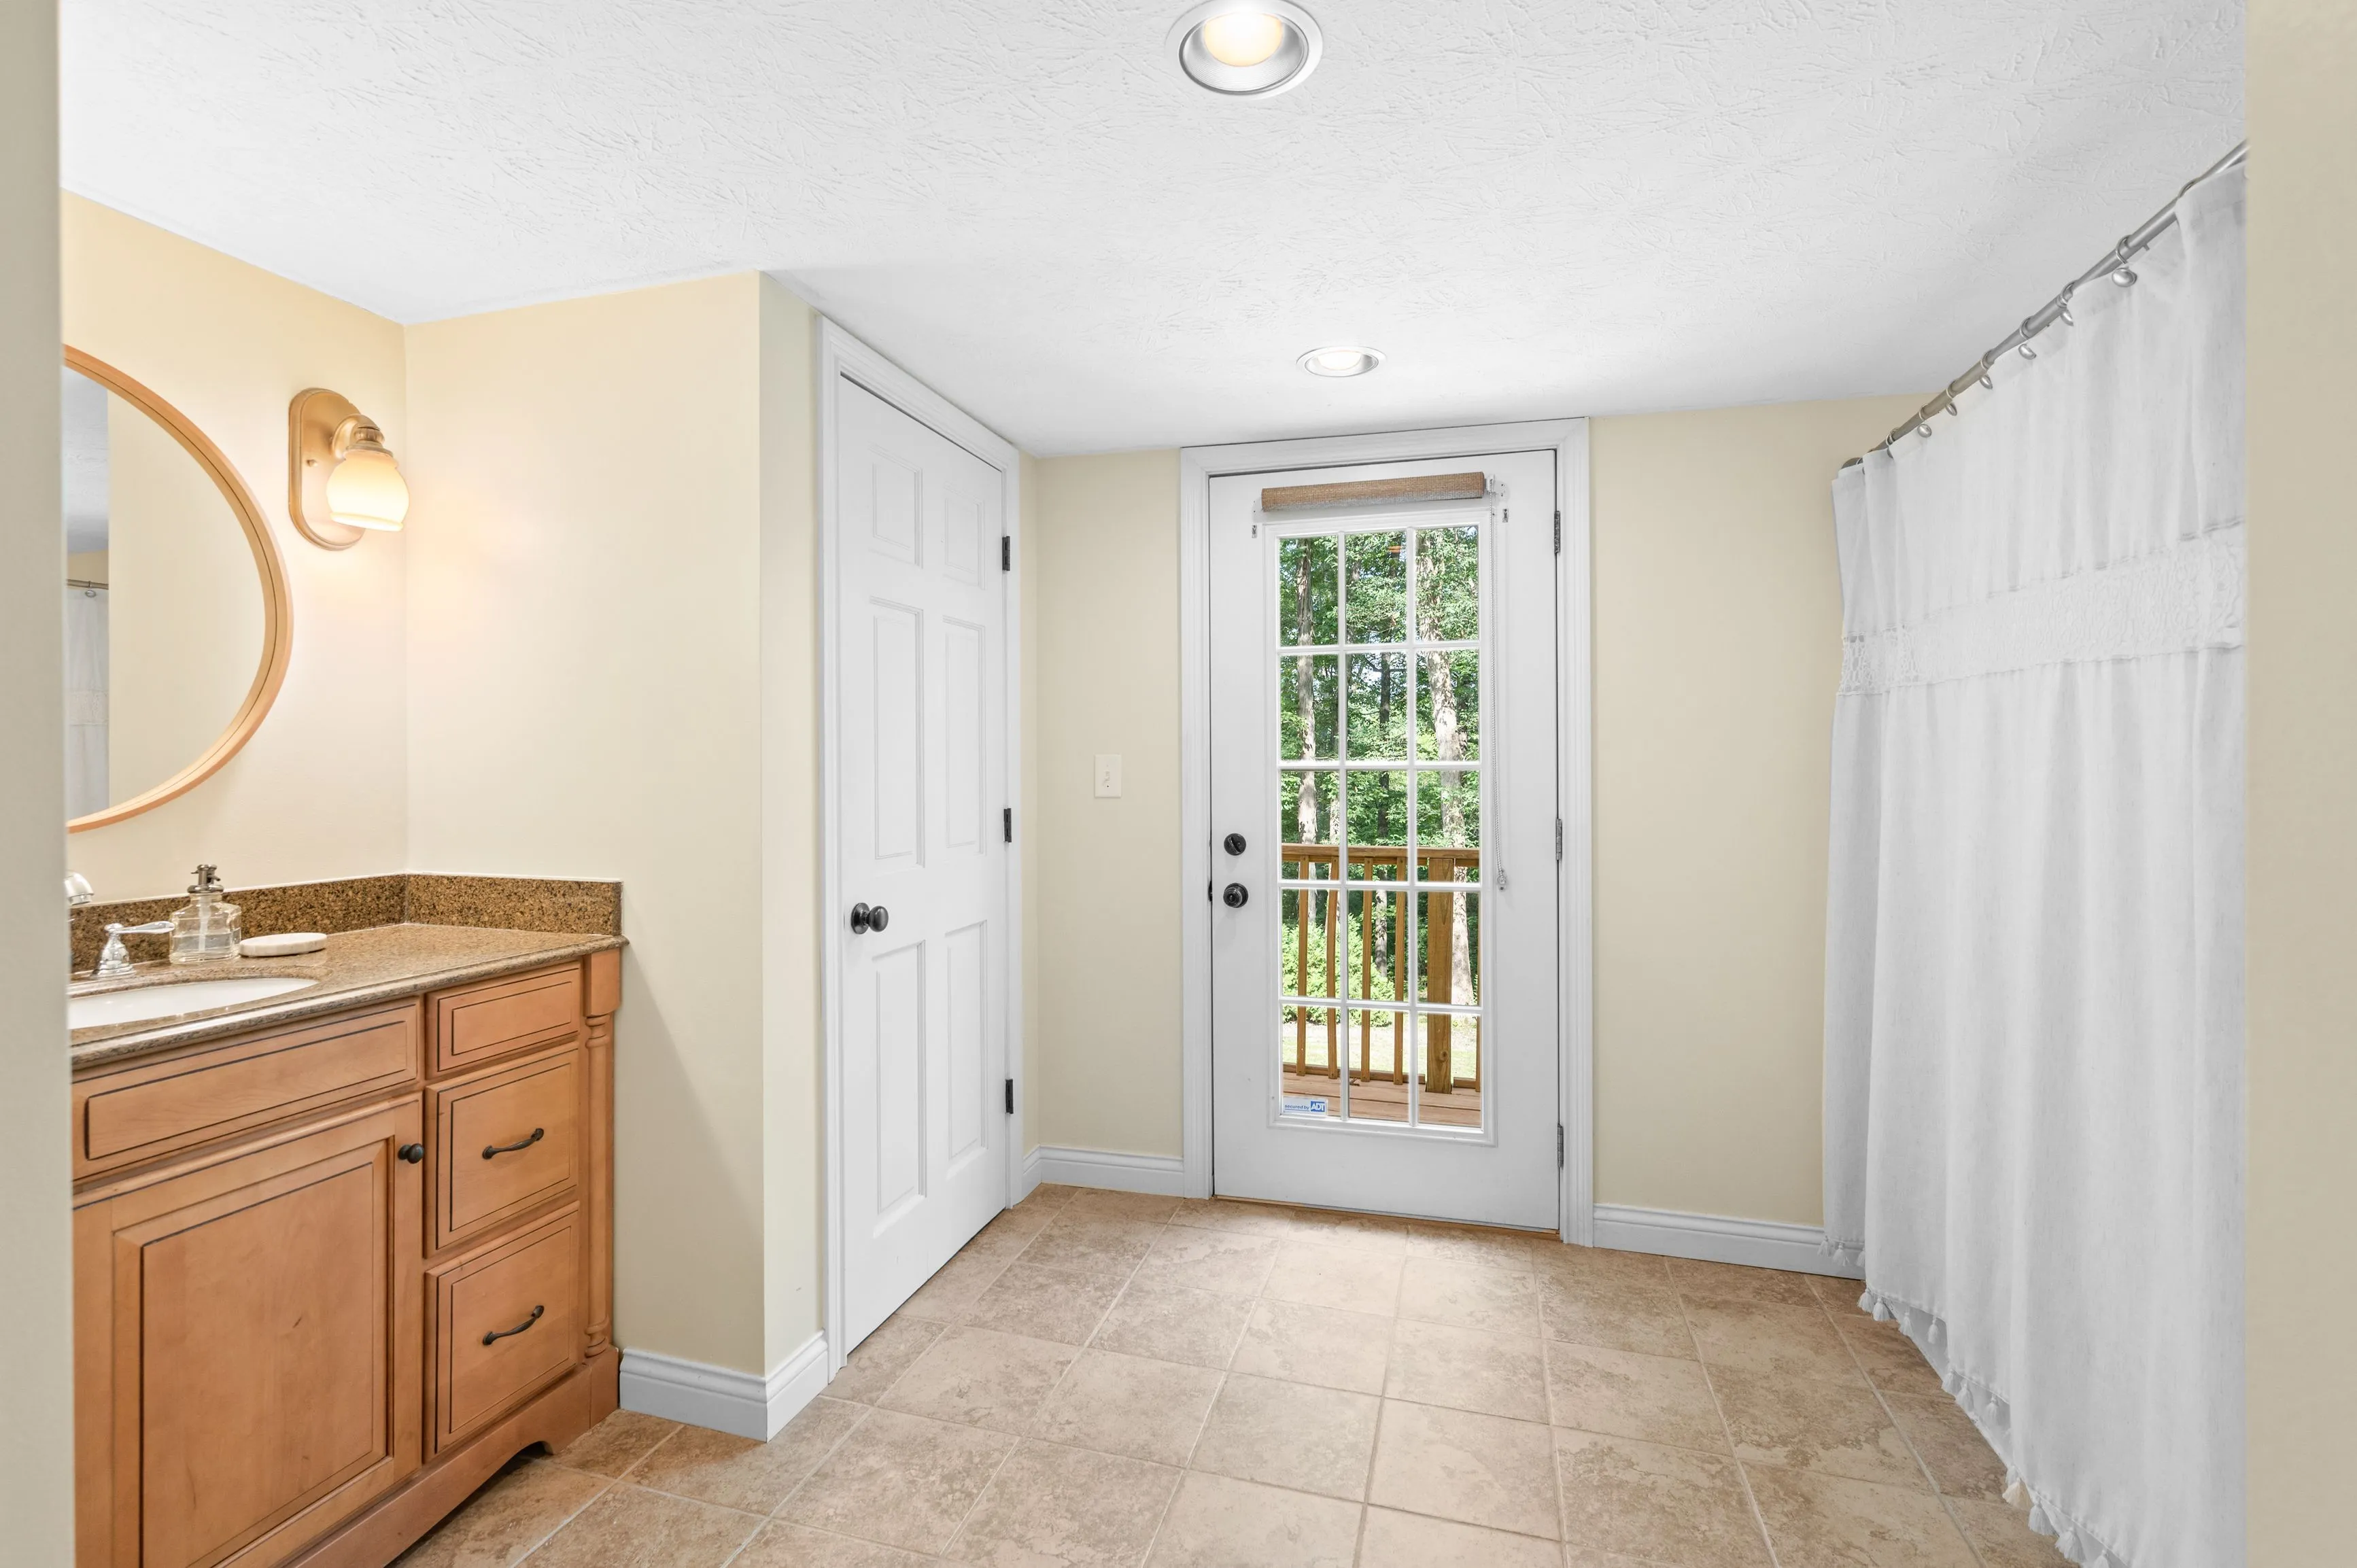 Bright, empty room with tiled floor, wooden vanity and sink on the left, open French doors leading to outside, and white curtains.